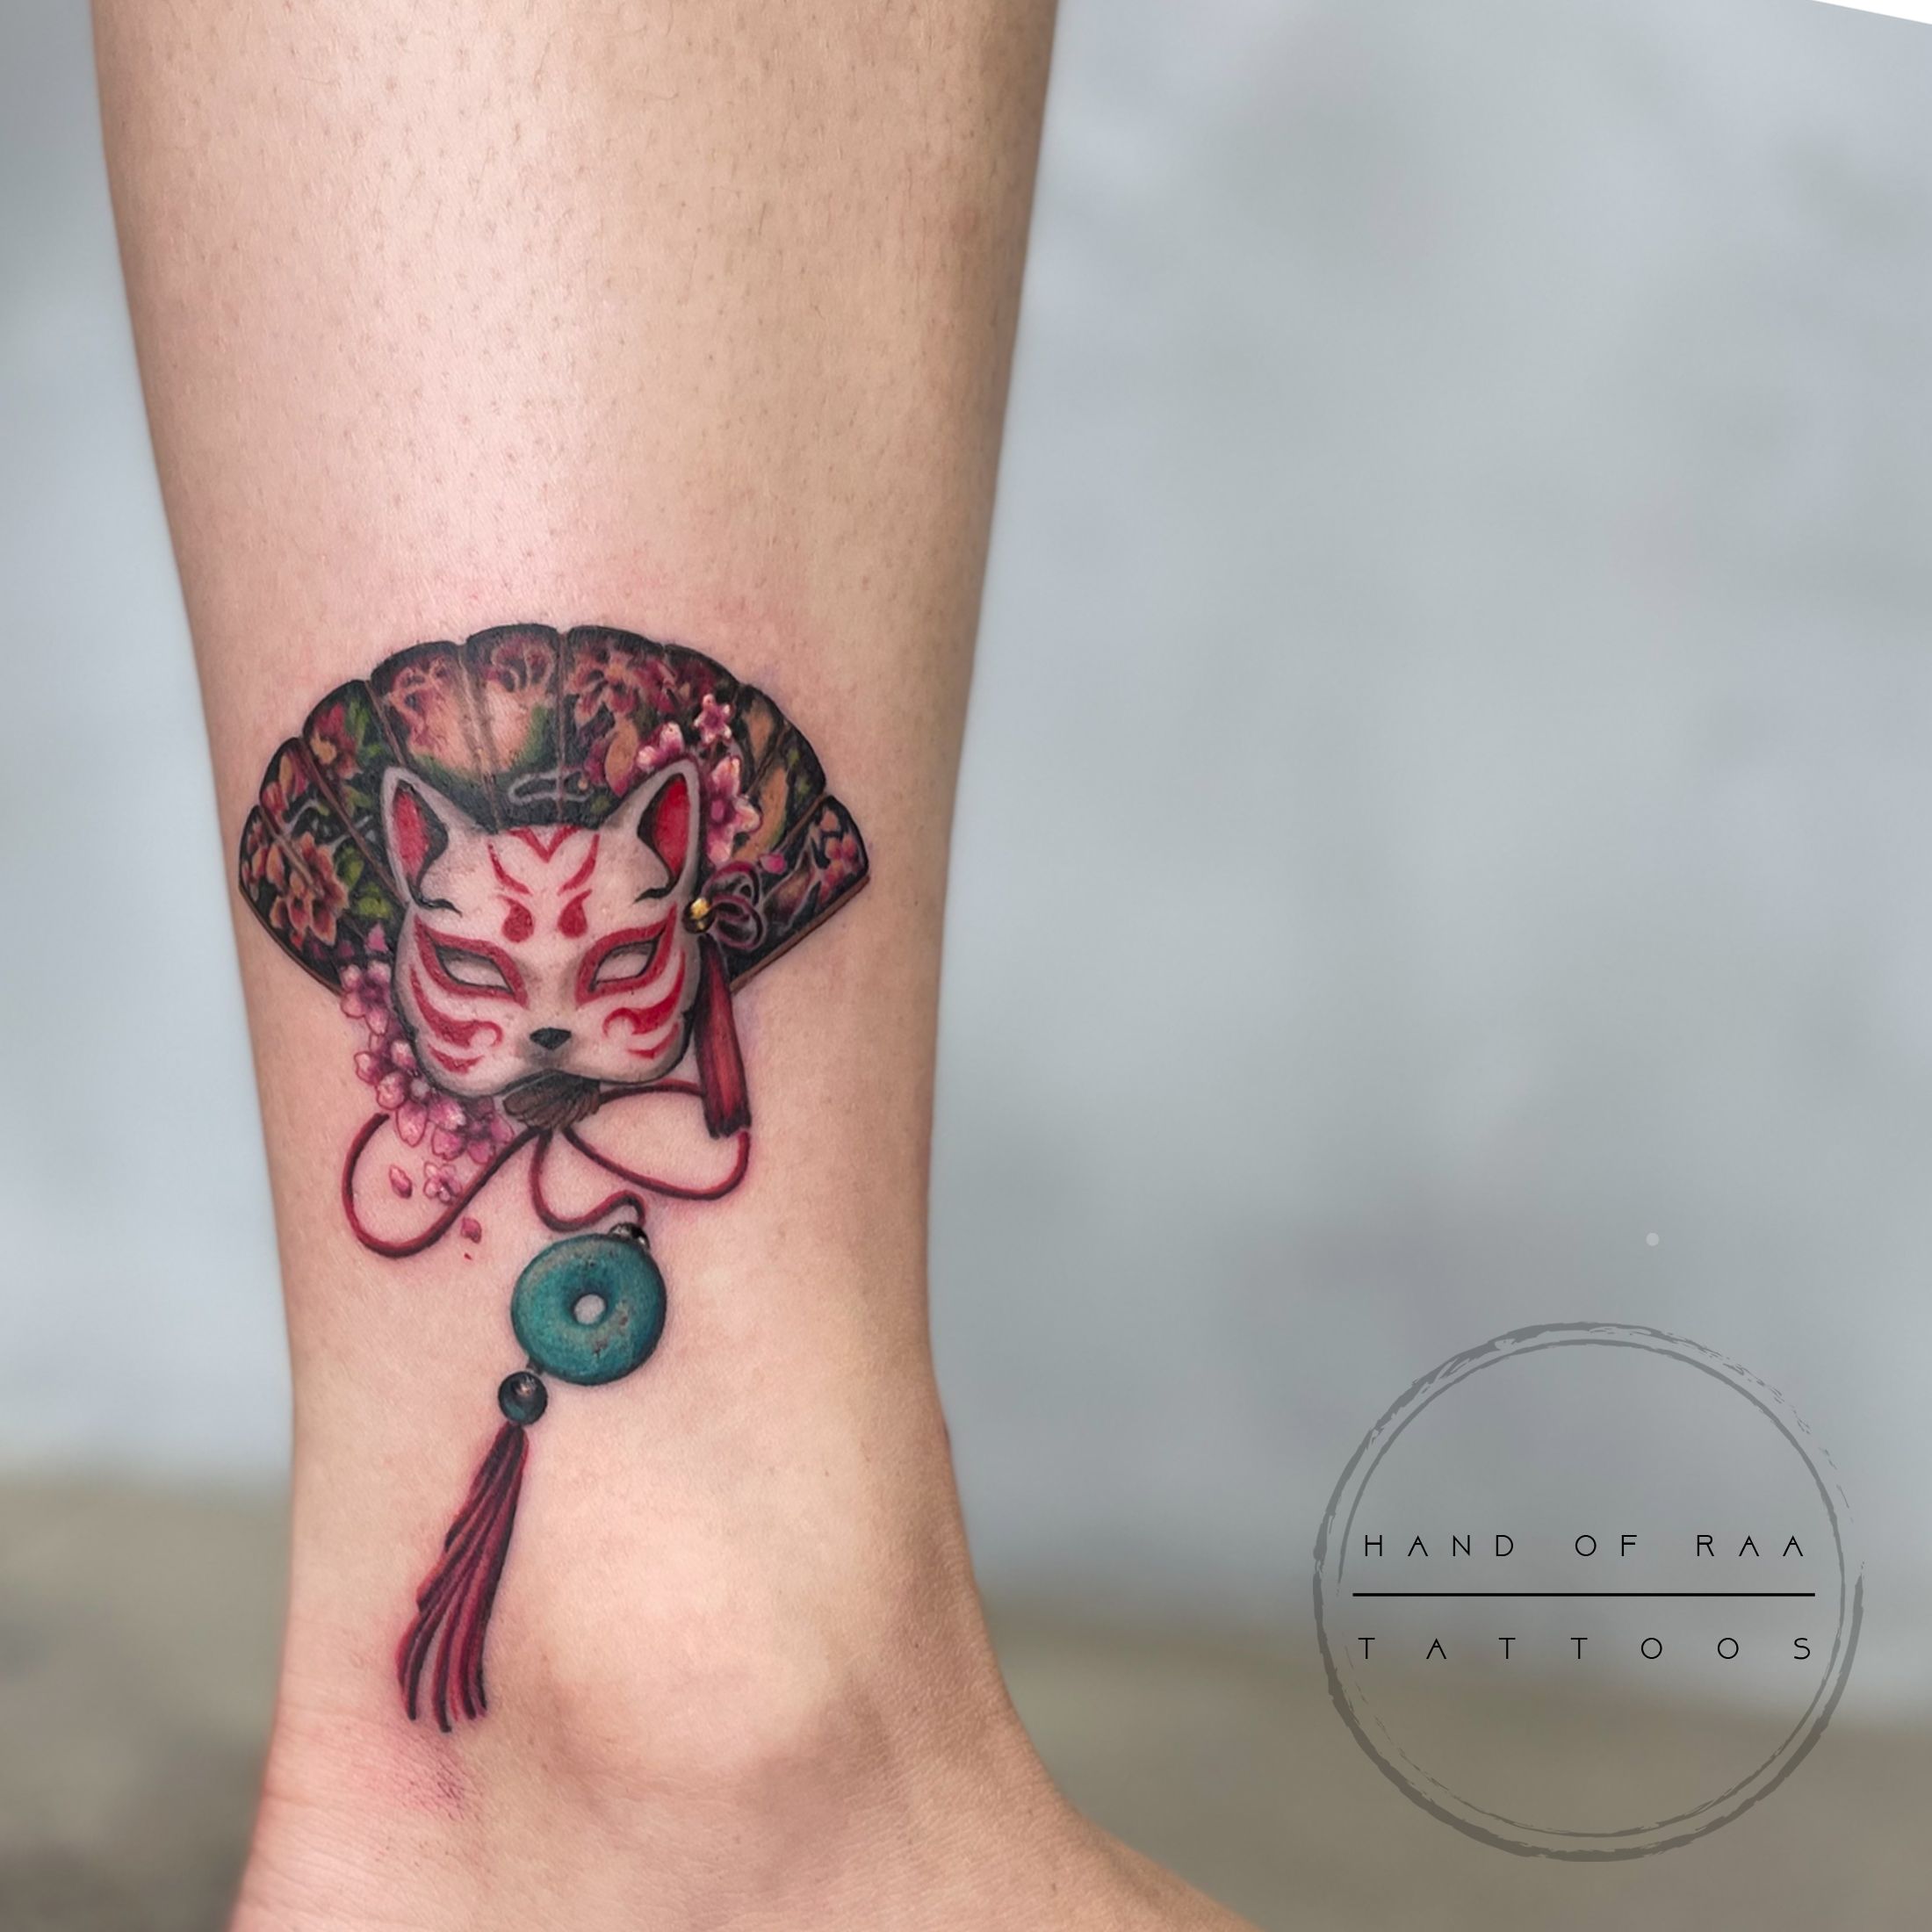 Tattoo uploaded by Anime_Henry_Colour _Tattoo • One piece and Naruto •  Tattoodo